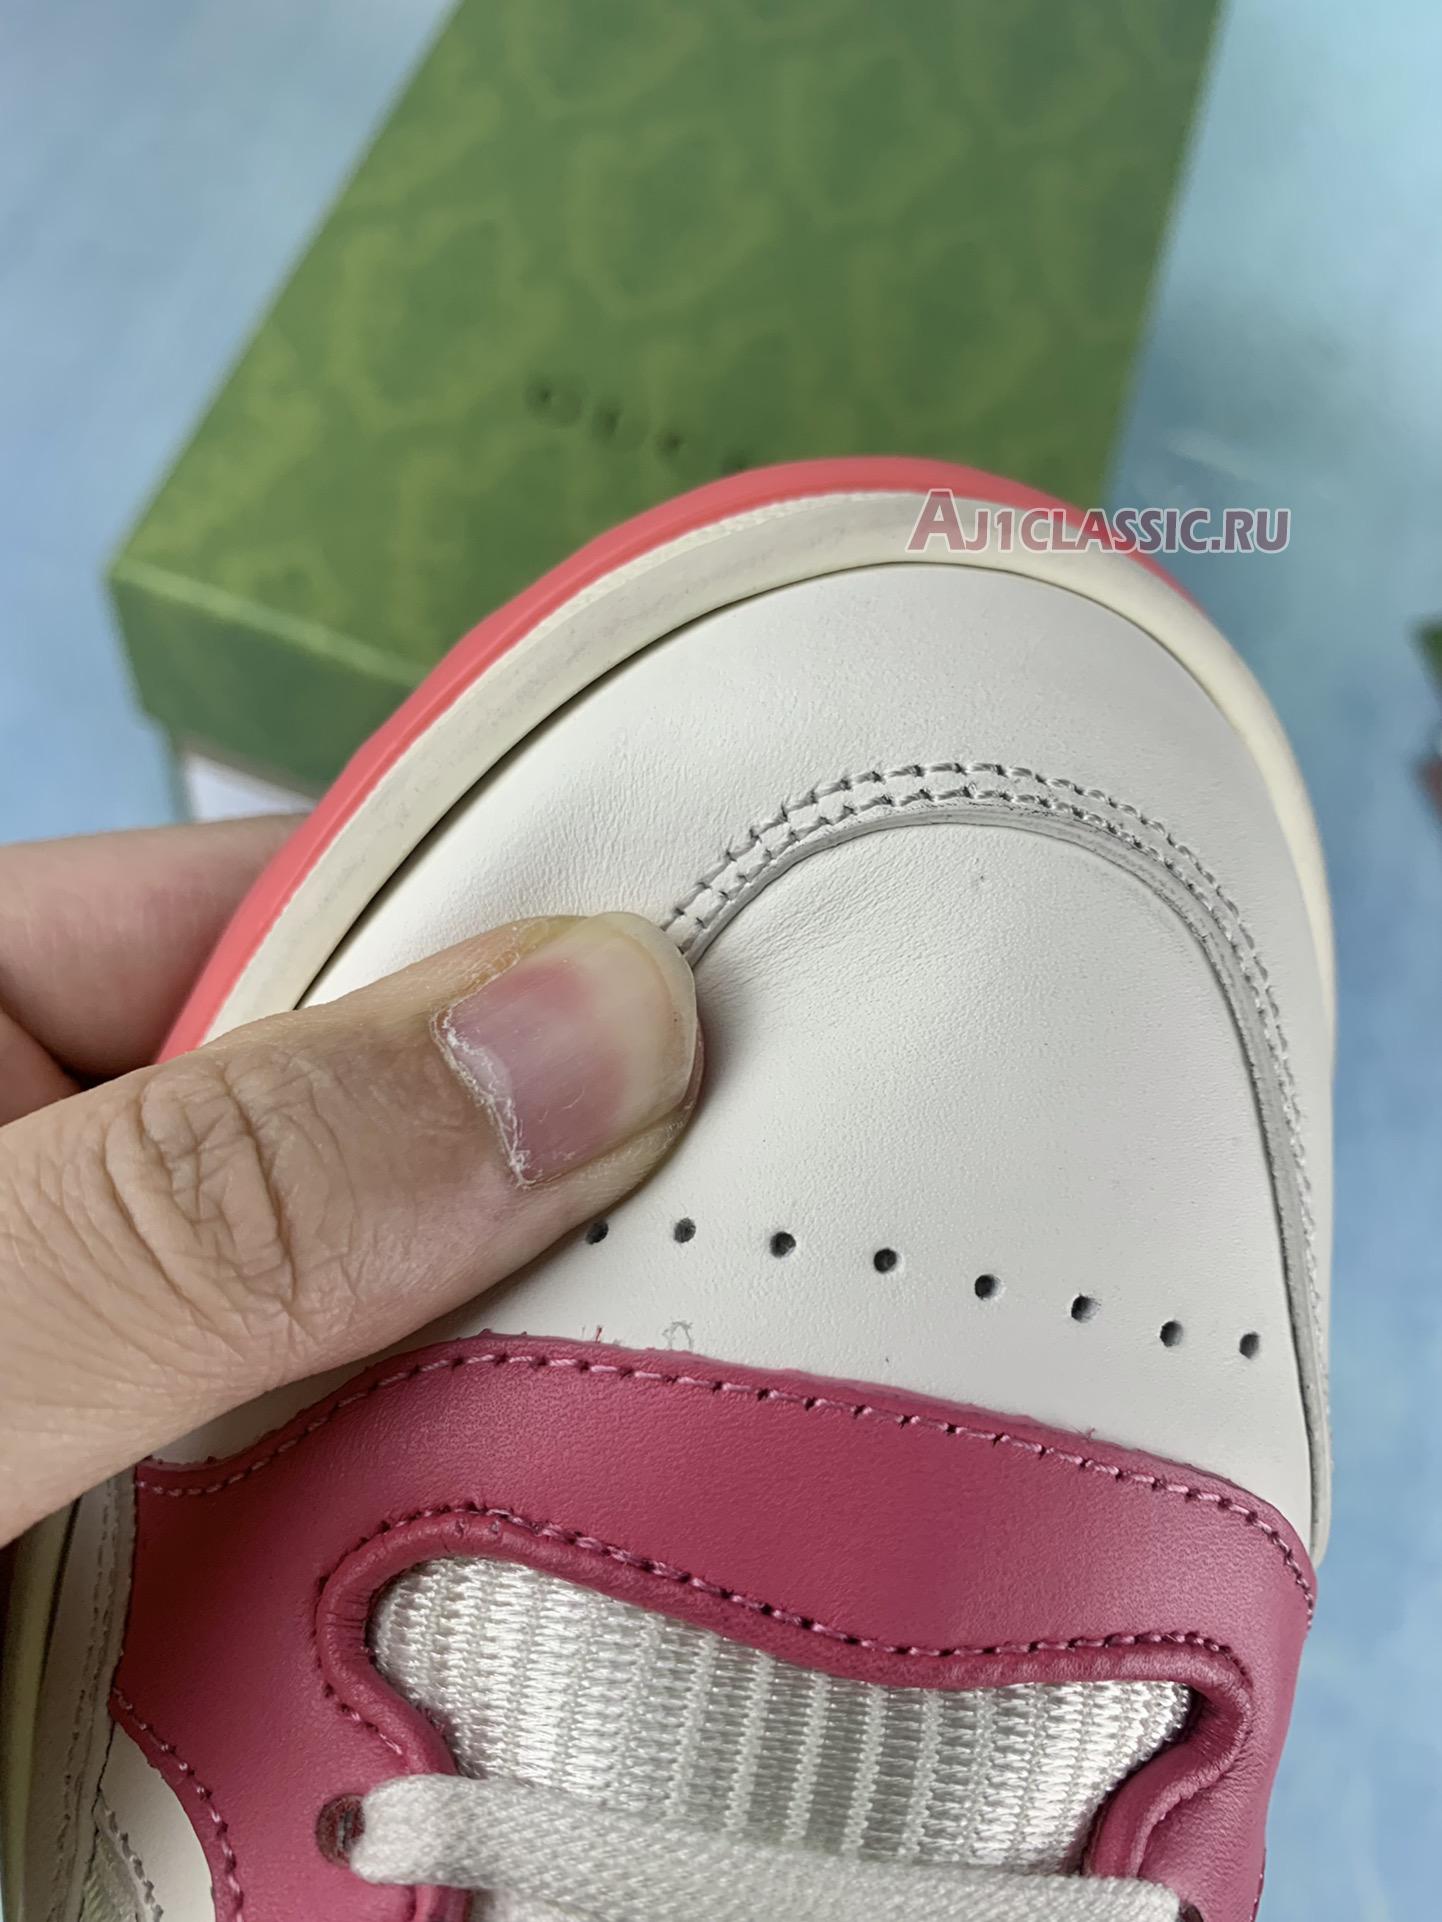 Gucci MAC80 Sneaker "Off White Pink" 749909 AAB79 9152